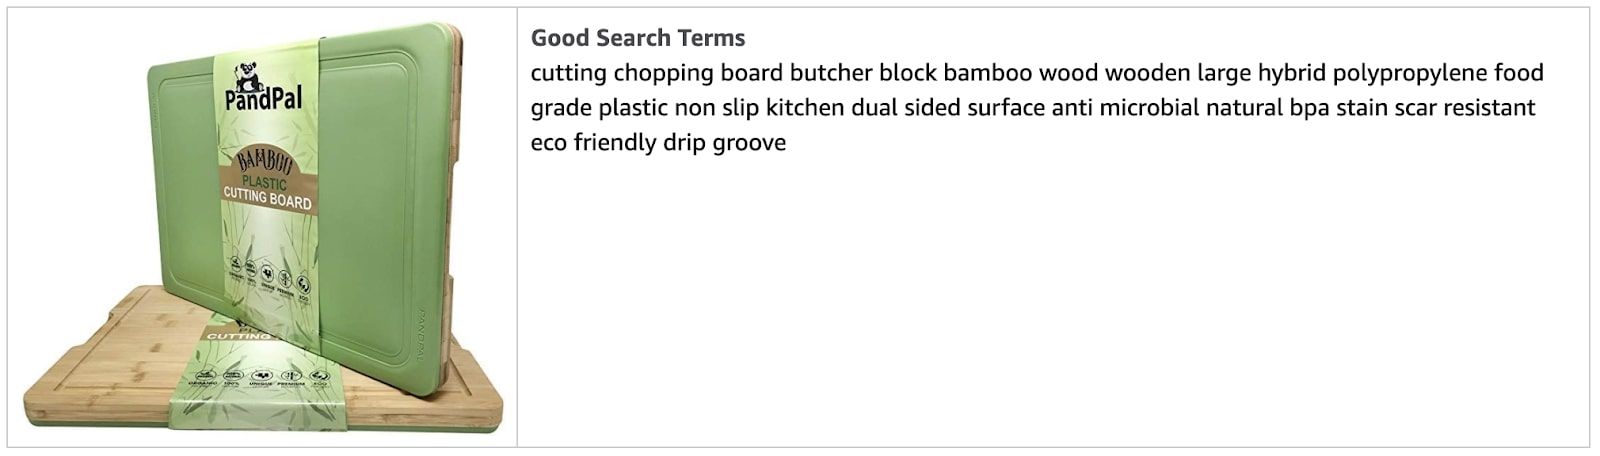 Amazon search terms example